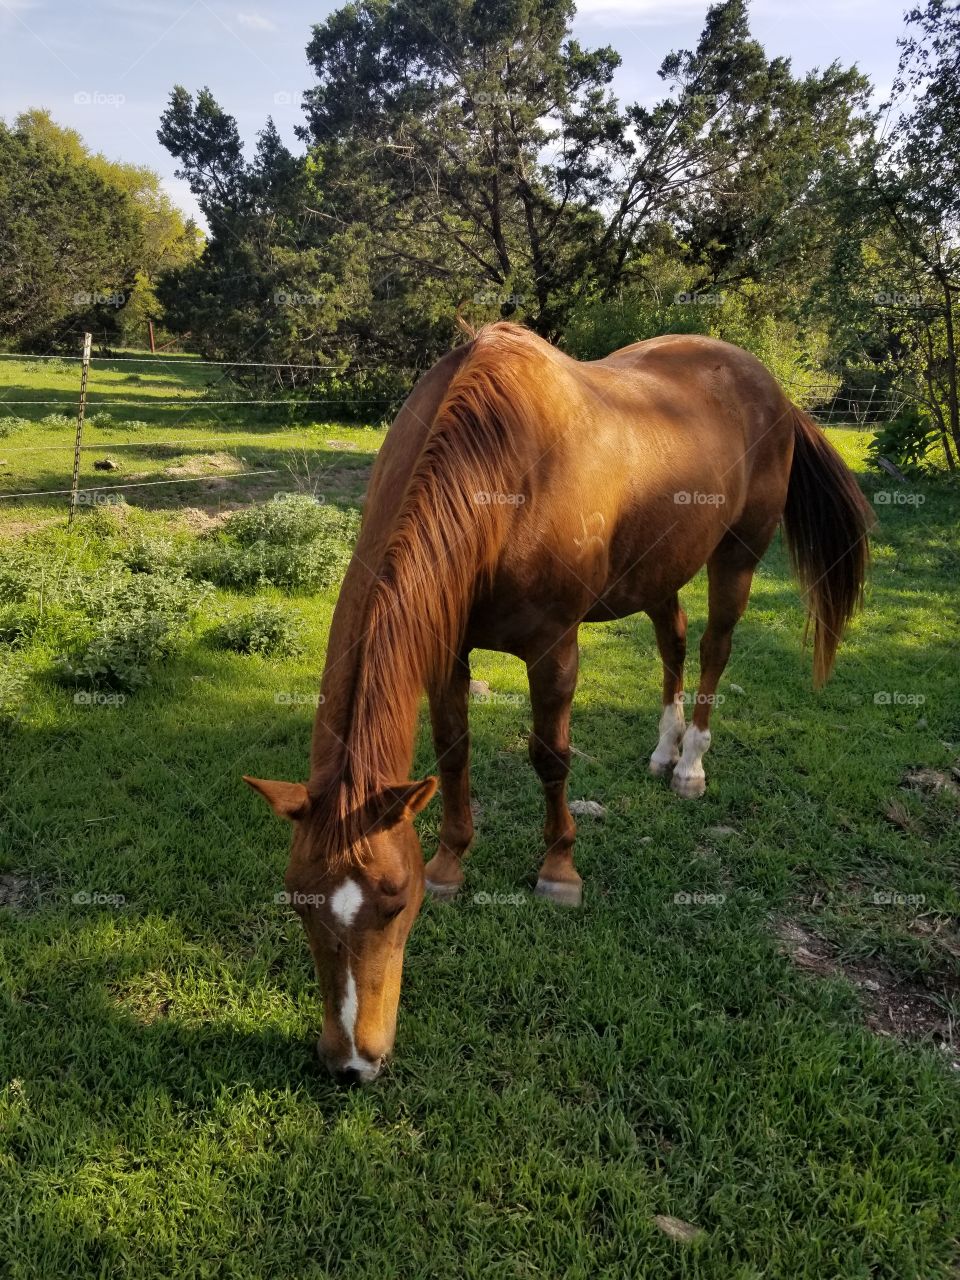 Brown horse with white blaze munches on some grass in Texas.